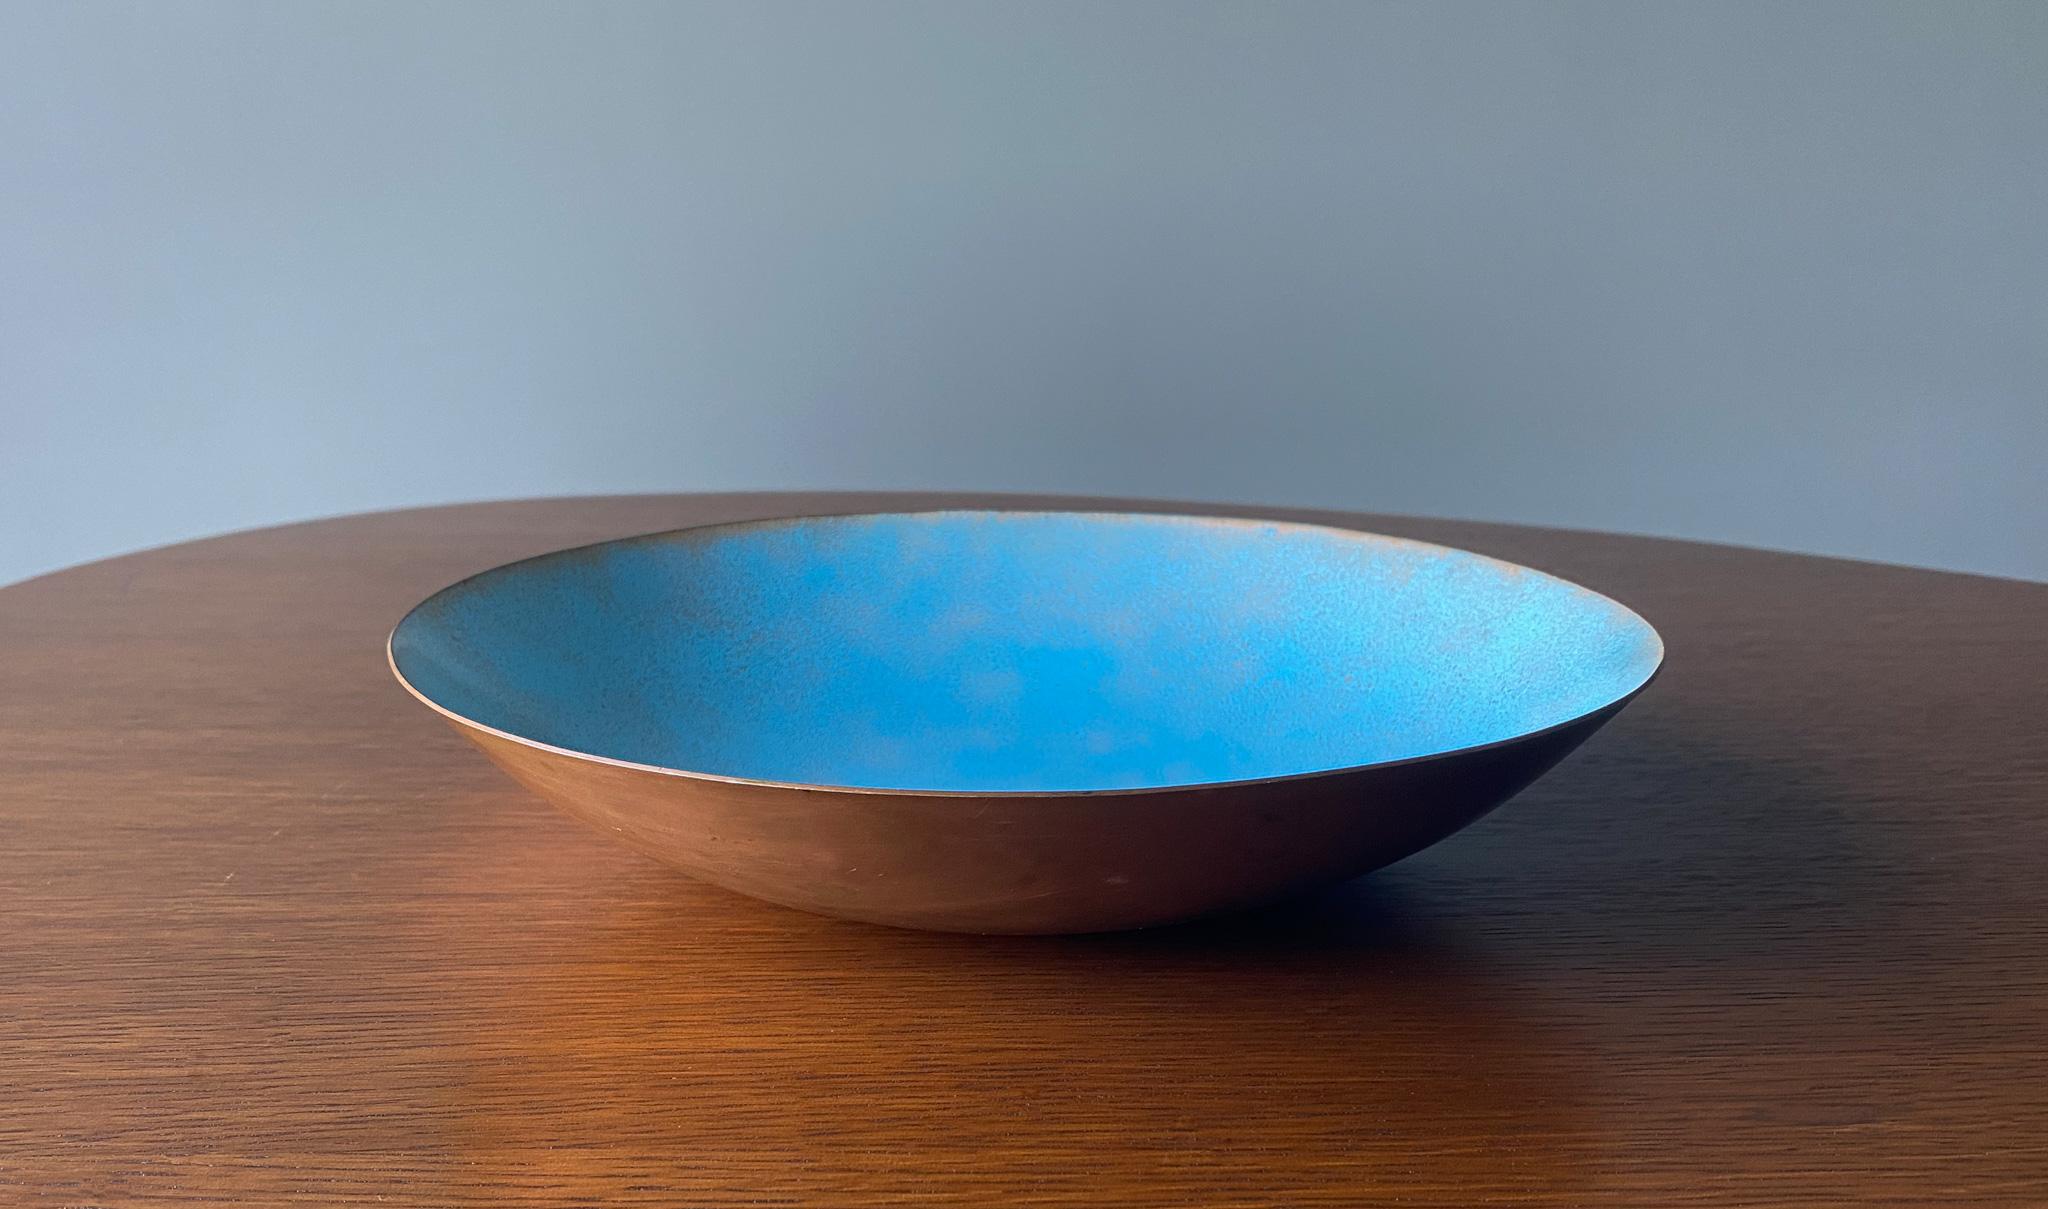 Jade Snow Wong Blue Enameled Copper Bowl, United States,  1950's.  Signed to the bottom. 